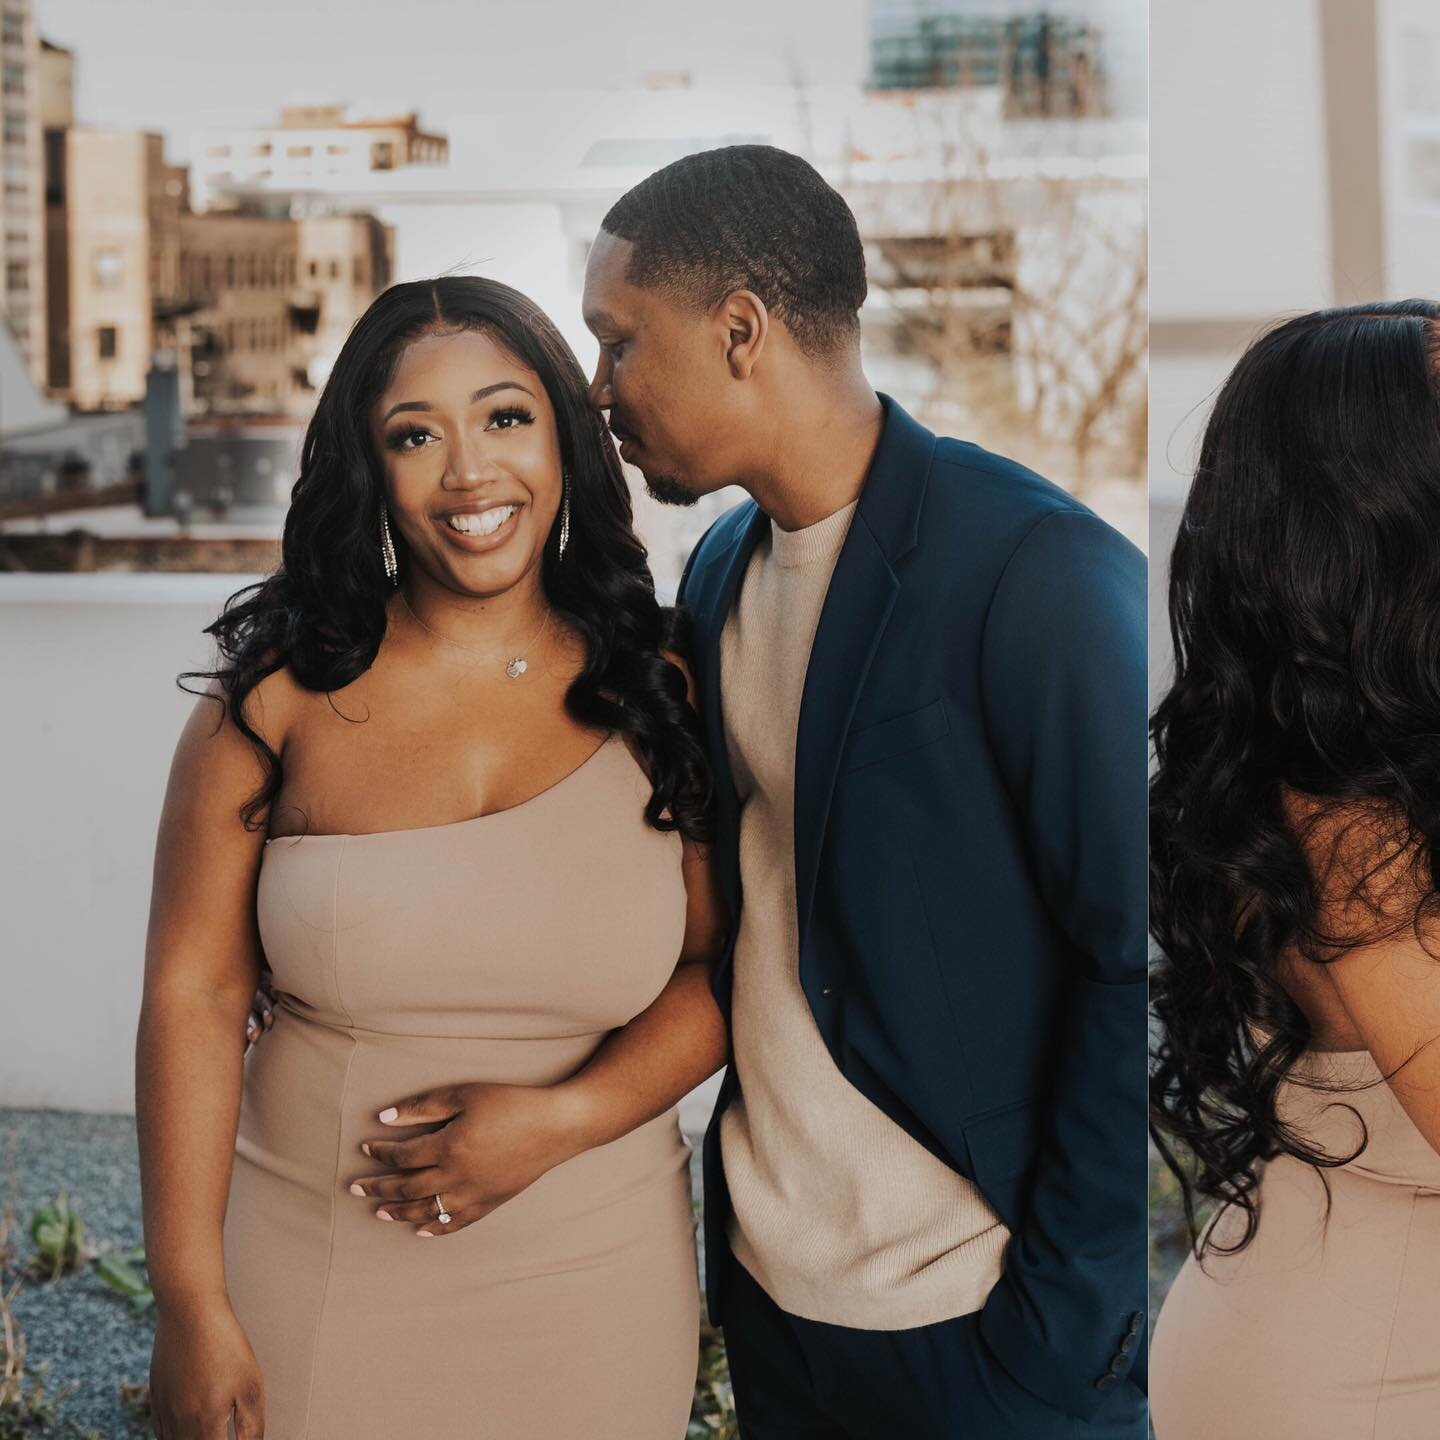 antezia + maxwell reached out to me a month or so ago to shoot their wedding!

we got together a few weeks back to do an engagement shoot to get to know eachother a bit more before the wedding just so im not showing up ON THE WEDDING DAY all like &qu